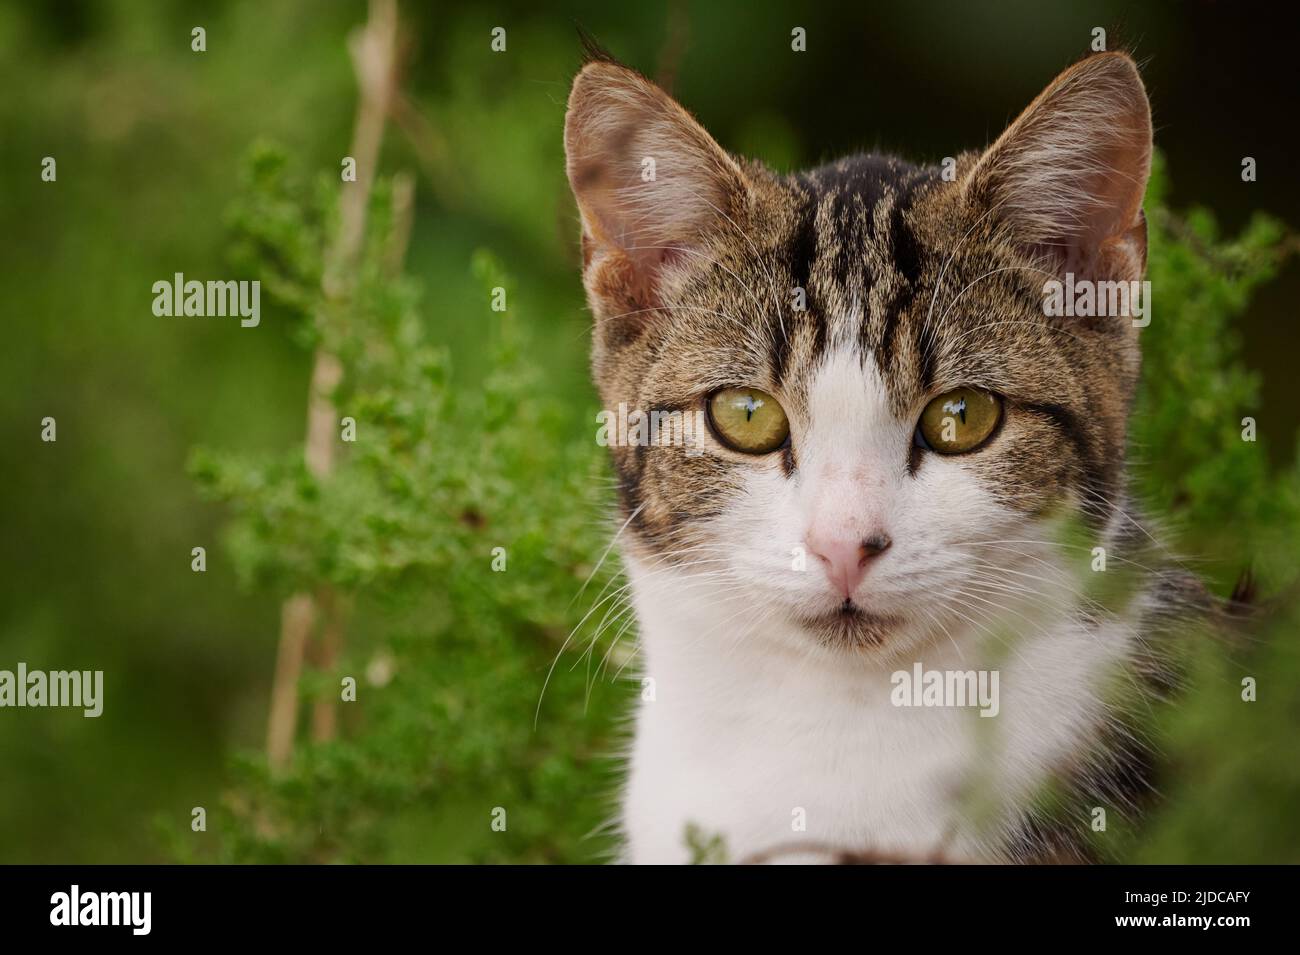 Cat, alert and looking for prey,  cclose up, selective focus of moggy while seated behind native bushes. Stock Photo